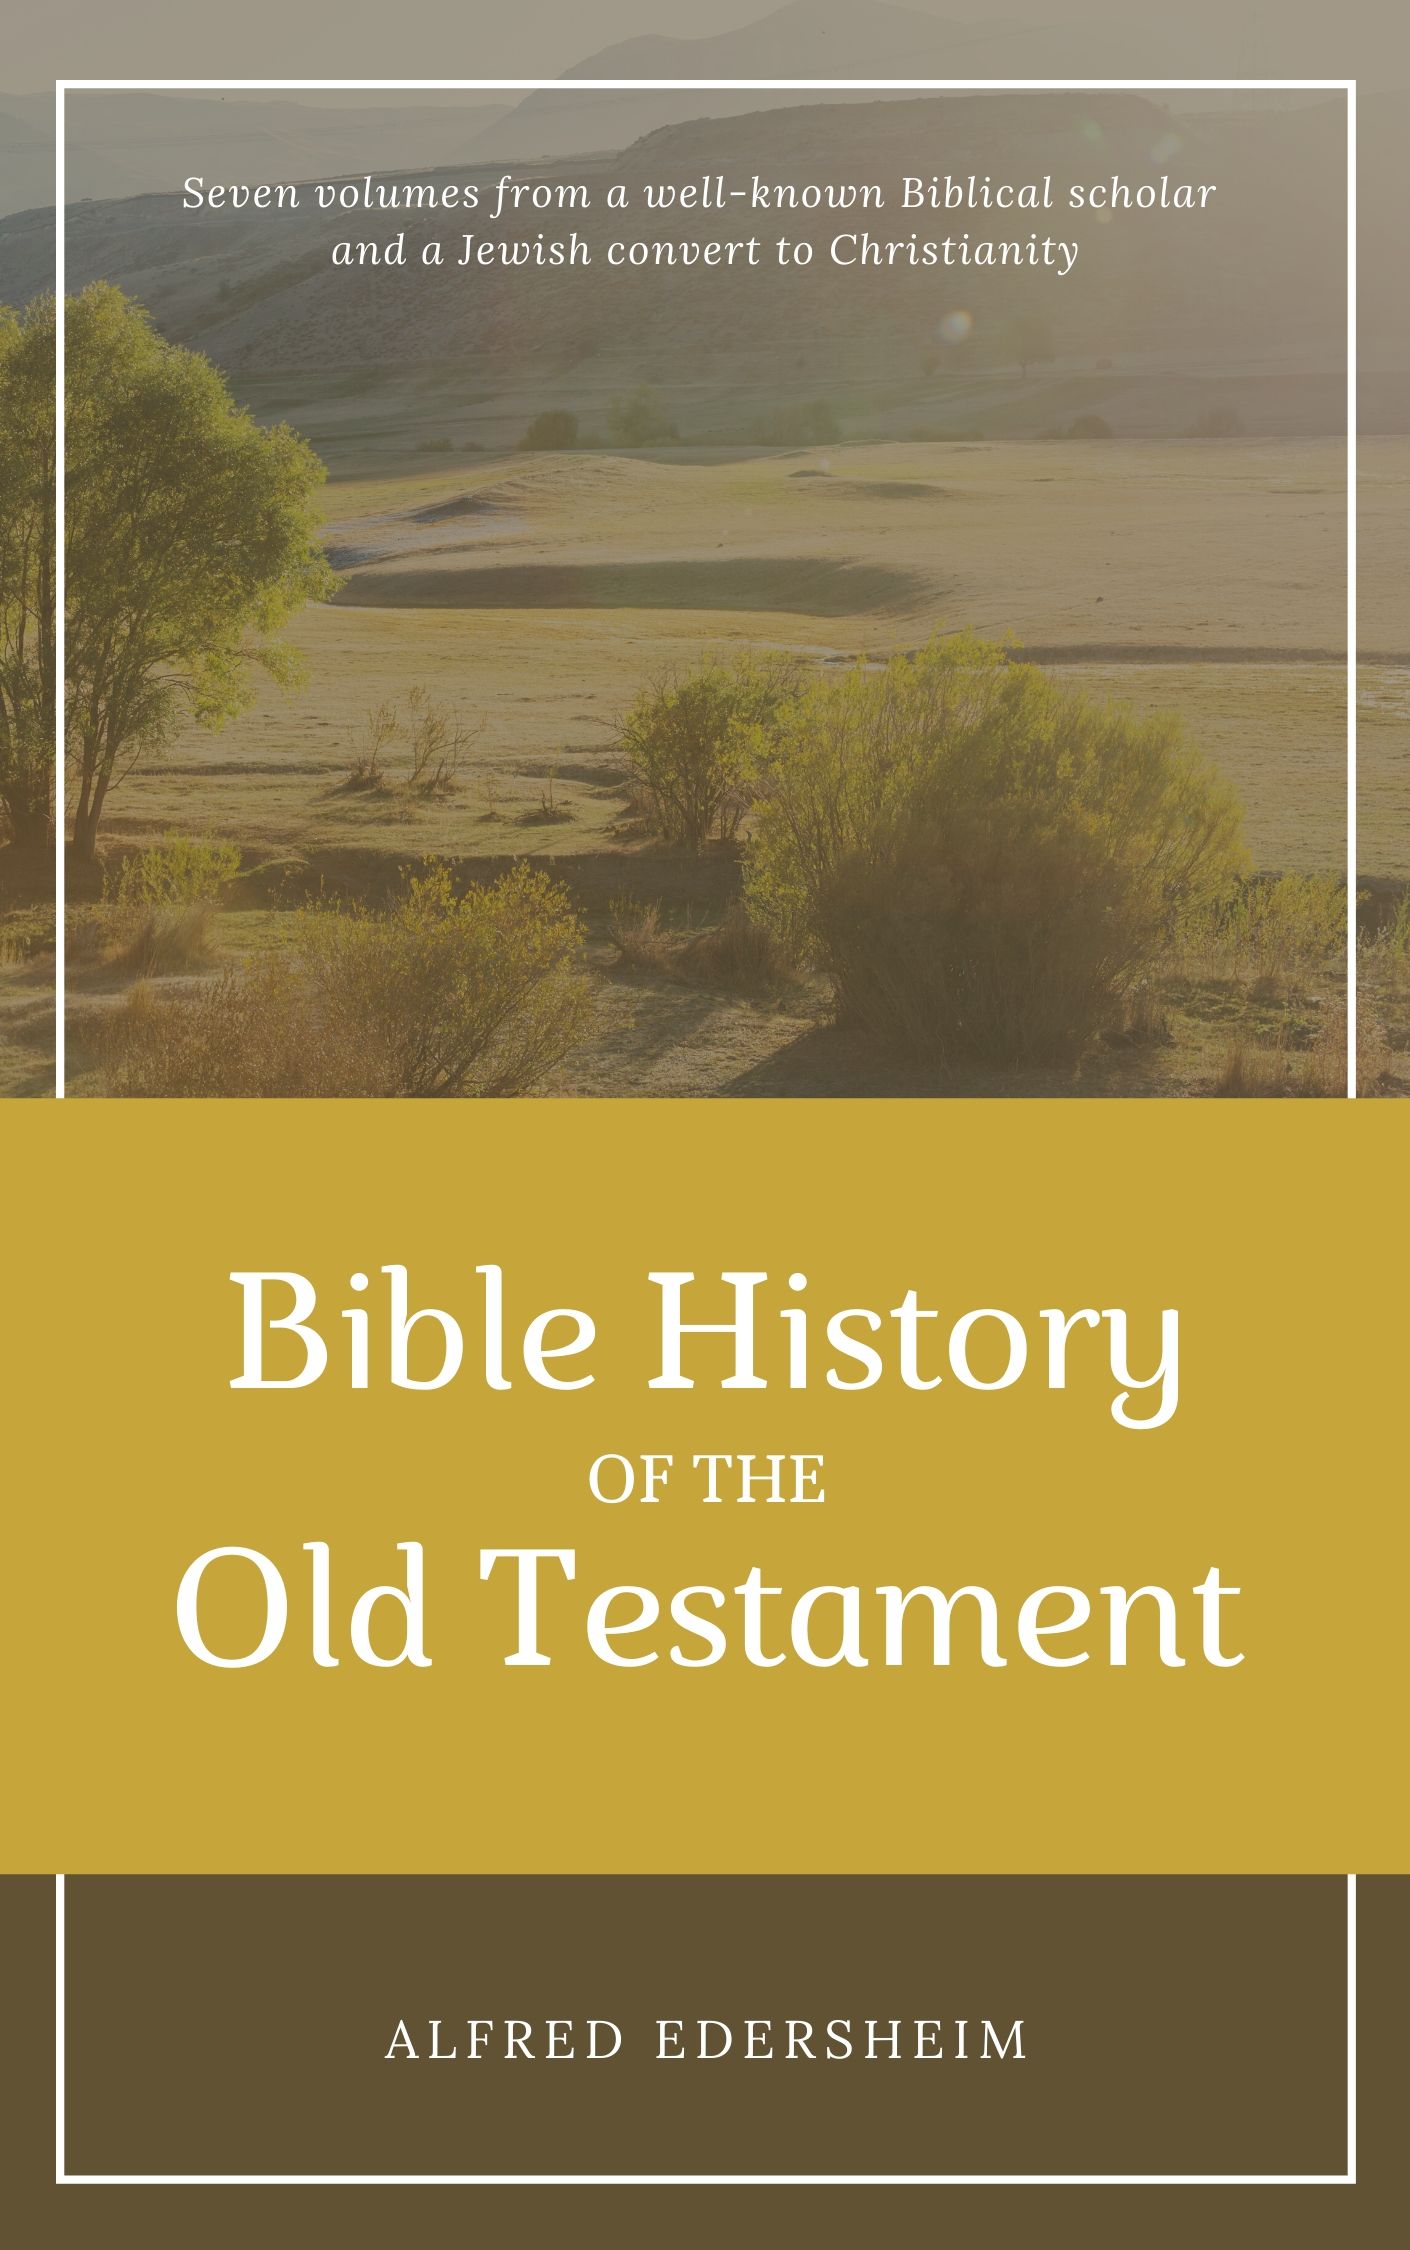 Bible History of the Old Testament (7 Vols.) by Alfred Edersheim... for the Olive Tree Bible App ...